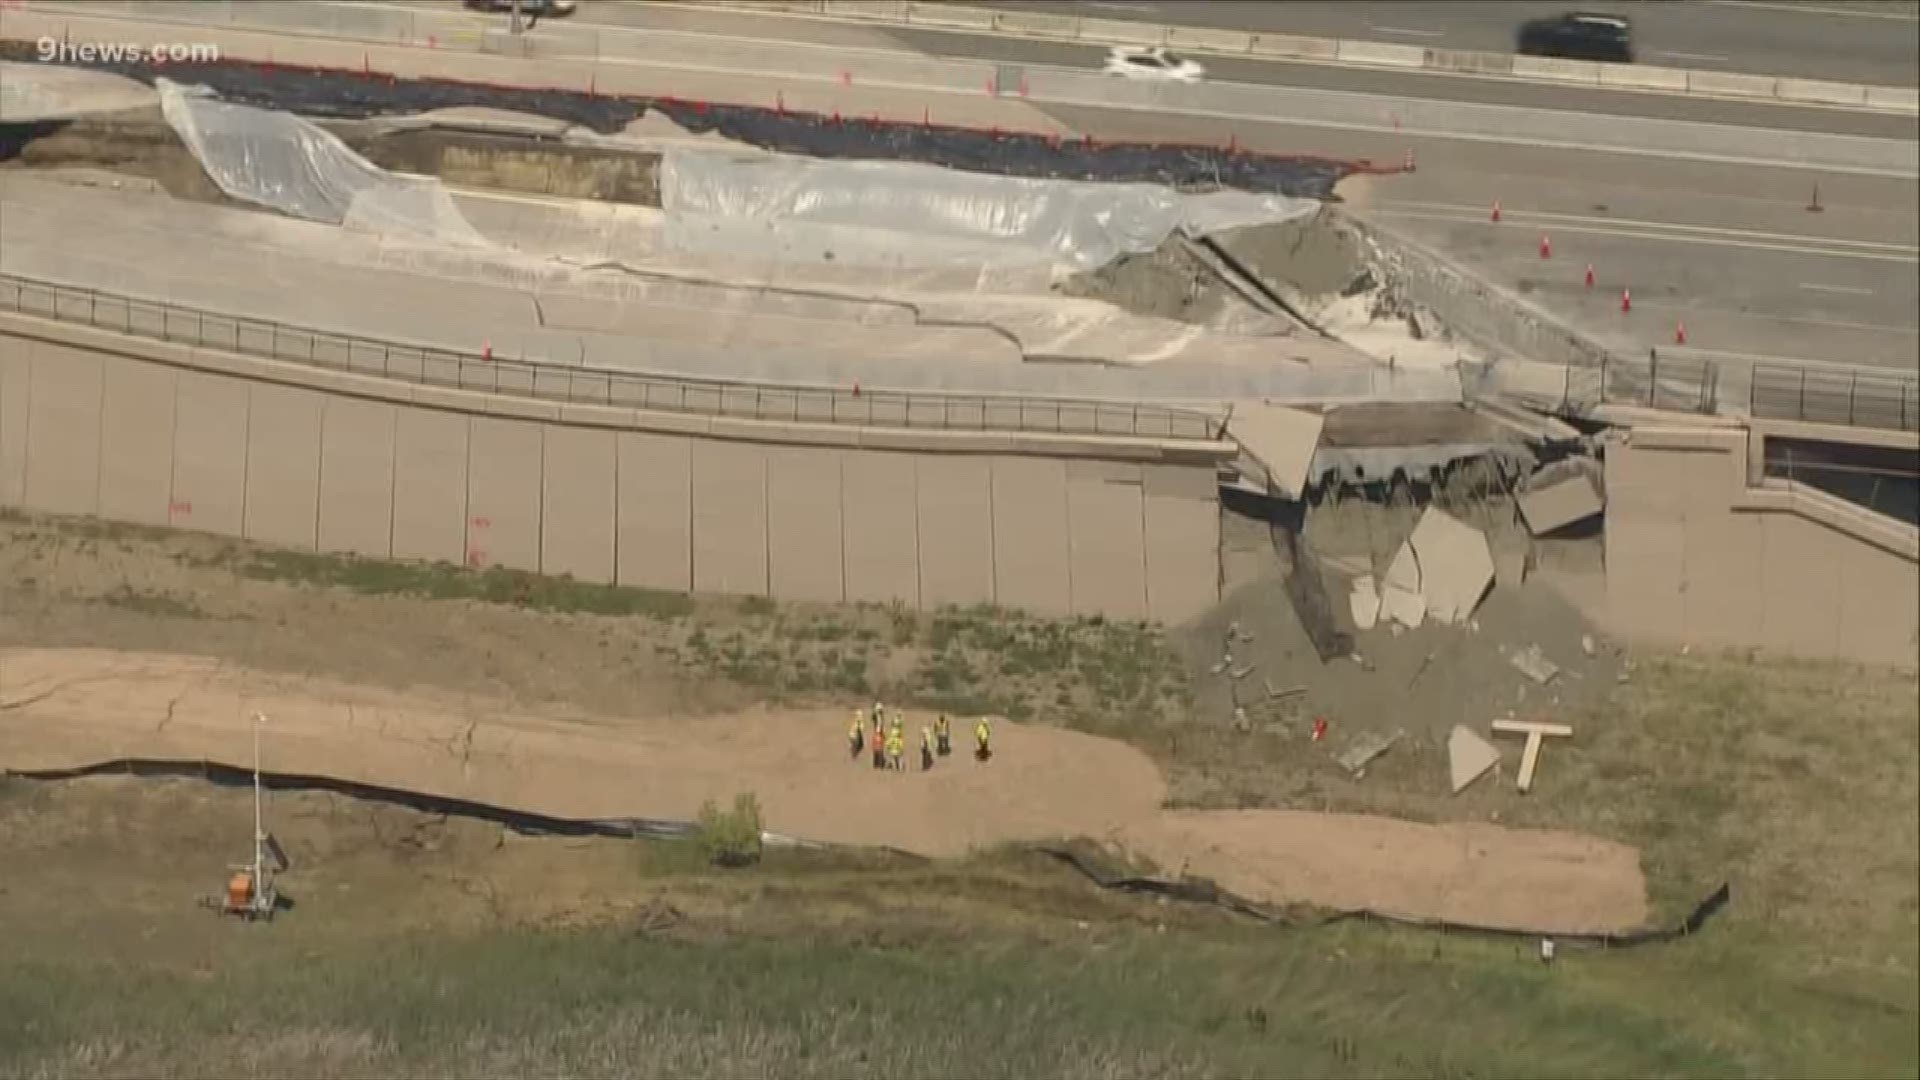 CDOT crews will remain in the area and expect to continue construction on the highway after a portion of it sank in July.